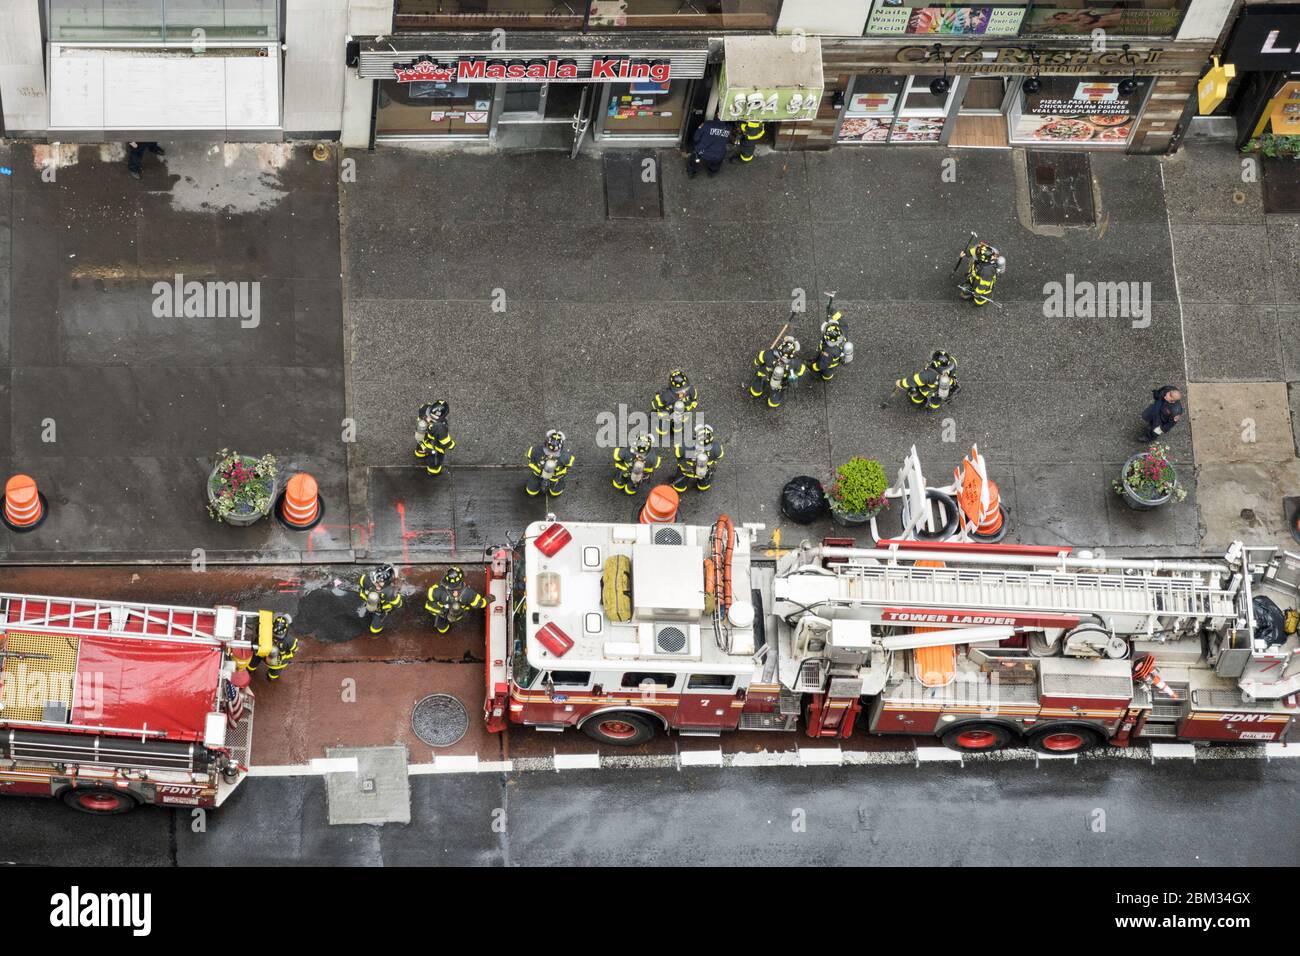 FDNY firemen in full turnout gear respond to an alarm in Midtown Manhattan, NYC, USA Stock Photo